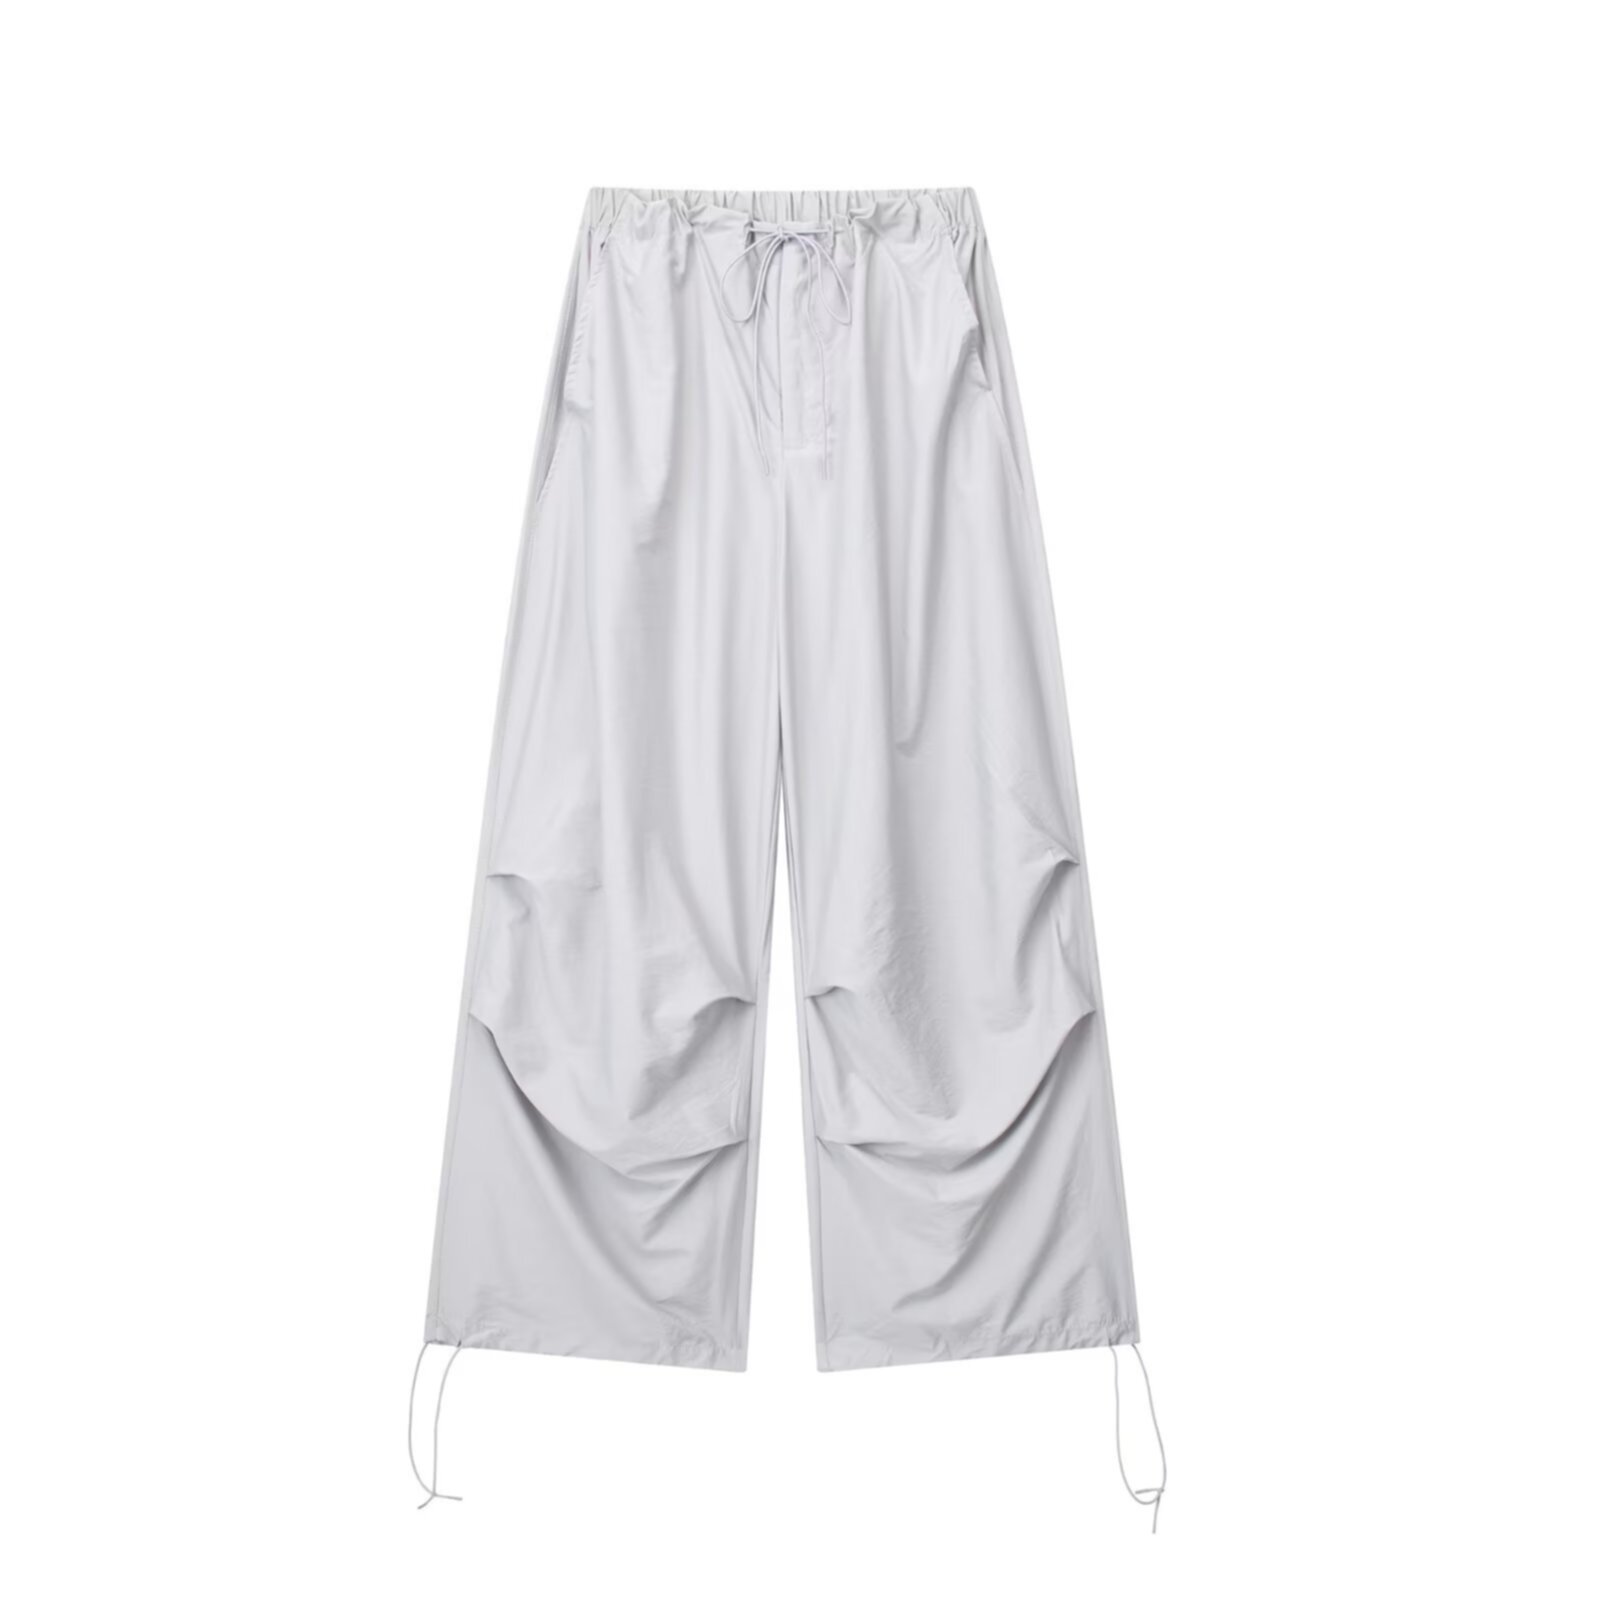 Casual loose fitting smooth soft sports pants